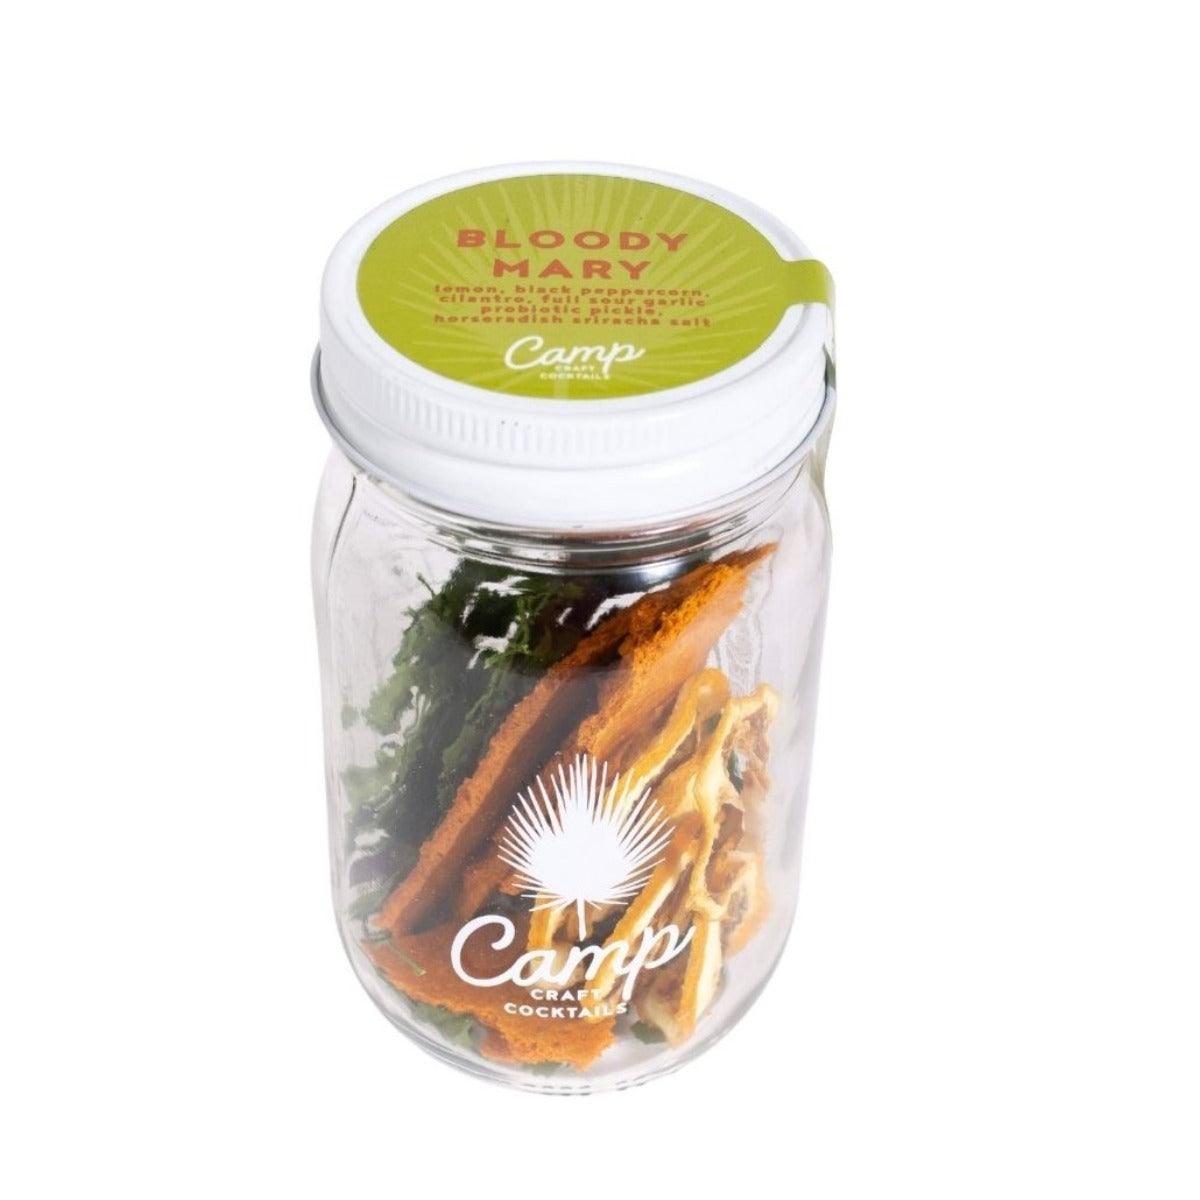 Bloody Mary Camp Craft Cocktails Kit- 16oz.